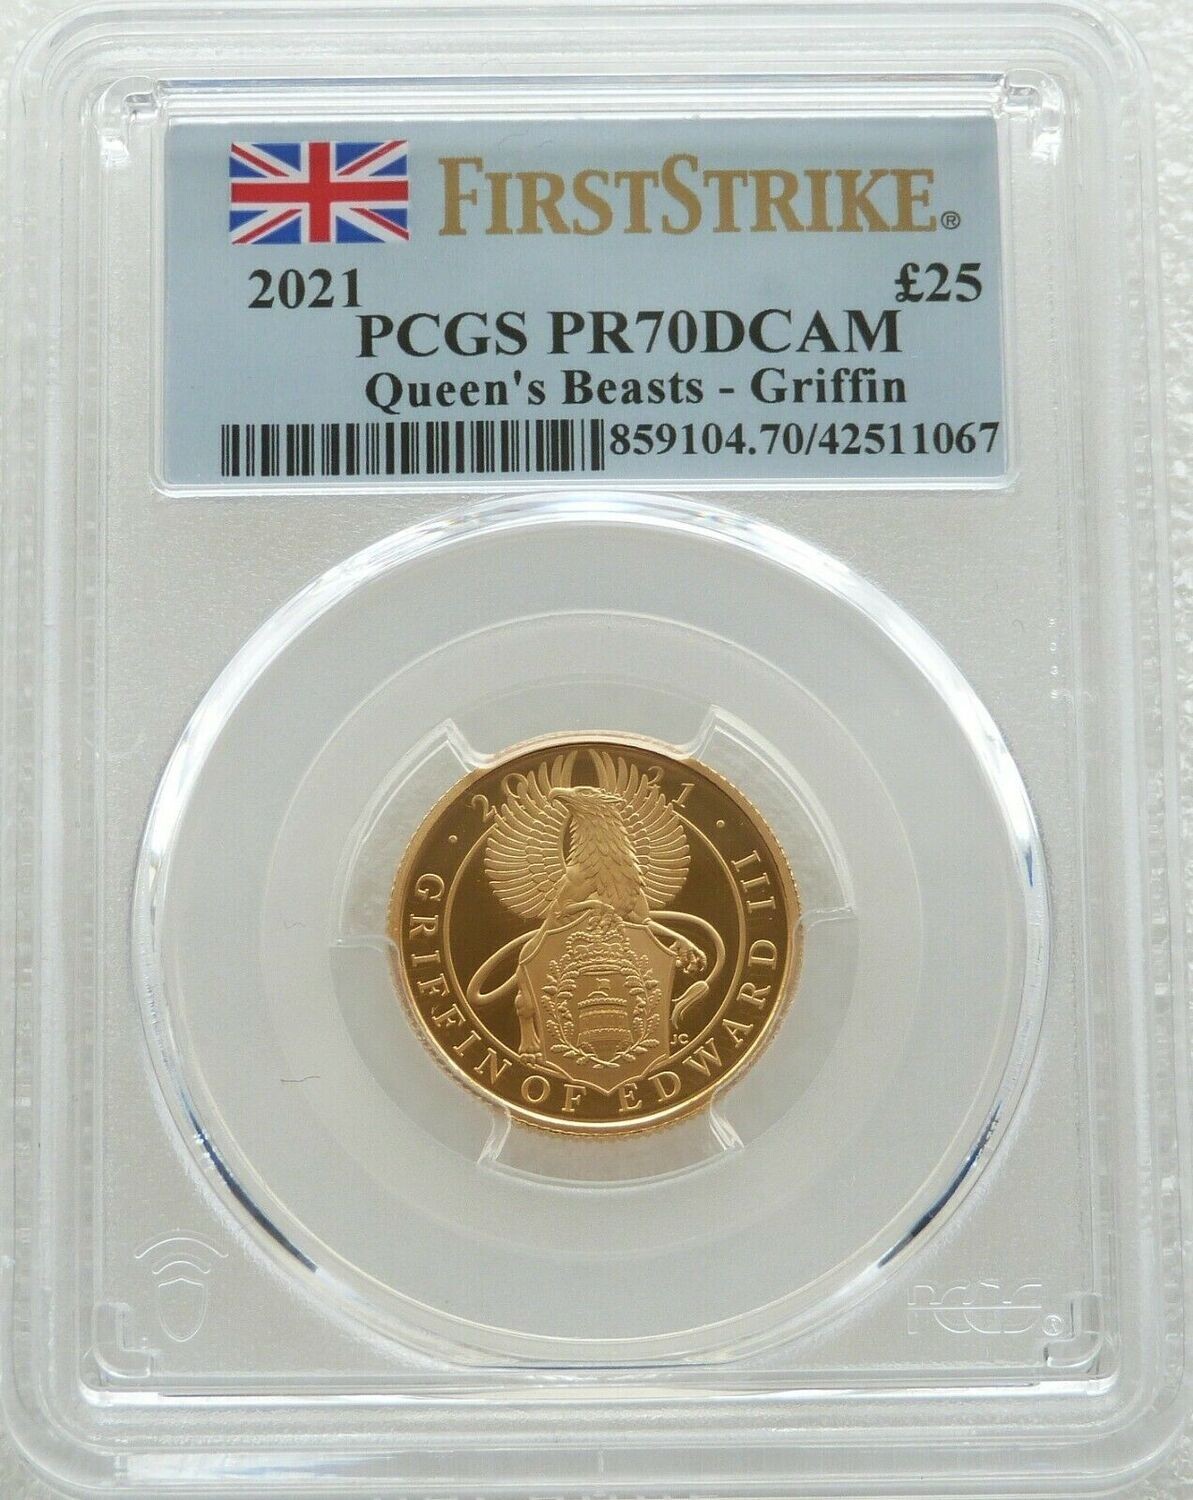 2021 Queens Beasts Griffin of Edward III £25 Gold Proof 1/4oz Coin PCGS PR70 DCAM First Strike